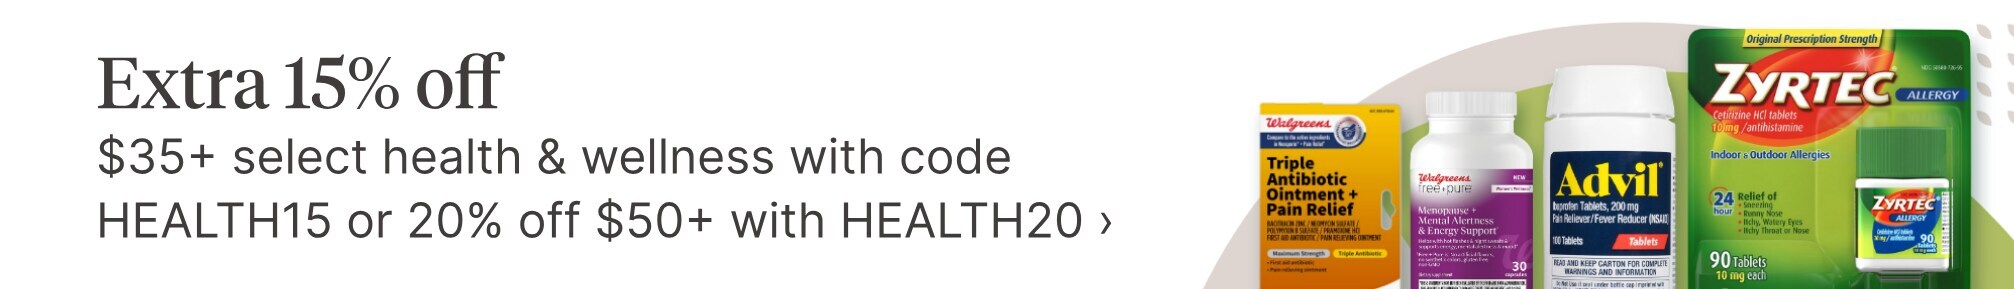 Extra 15% off $35+ select health & wellness with code HEALTH15 or 20% off $50+ with HEALTH20.